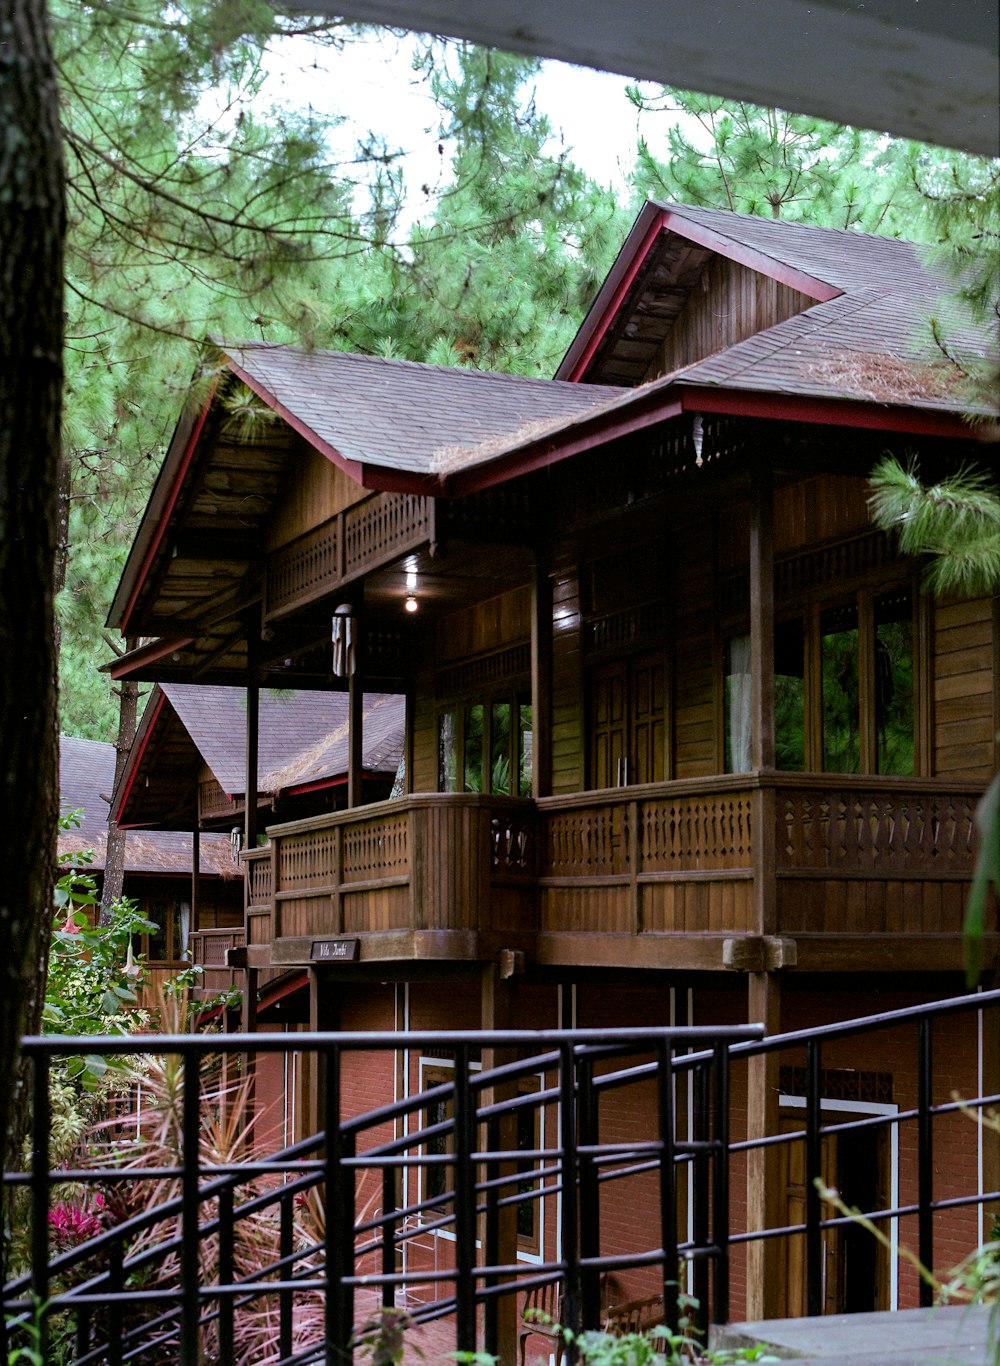 a wooden house surrounded by trees in a forest